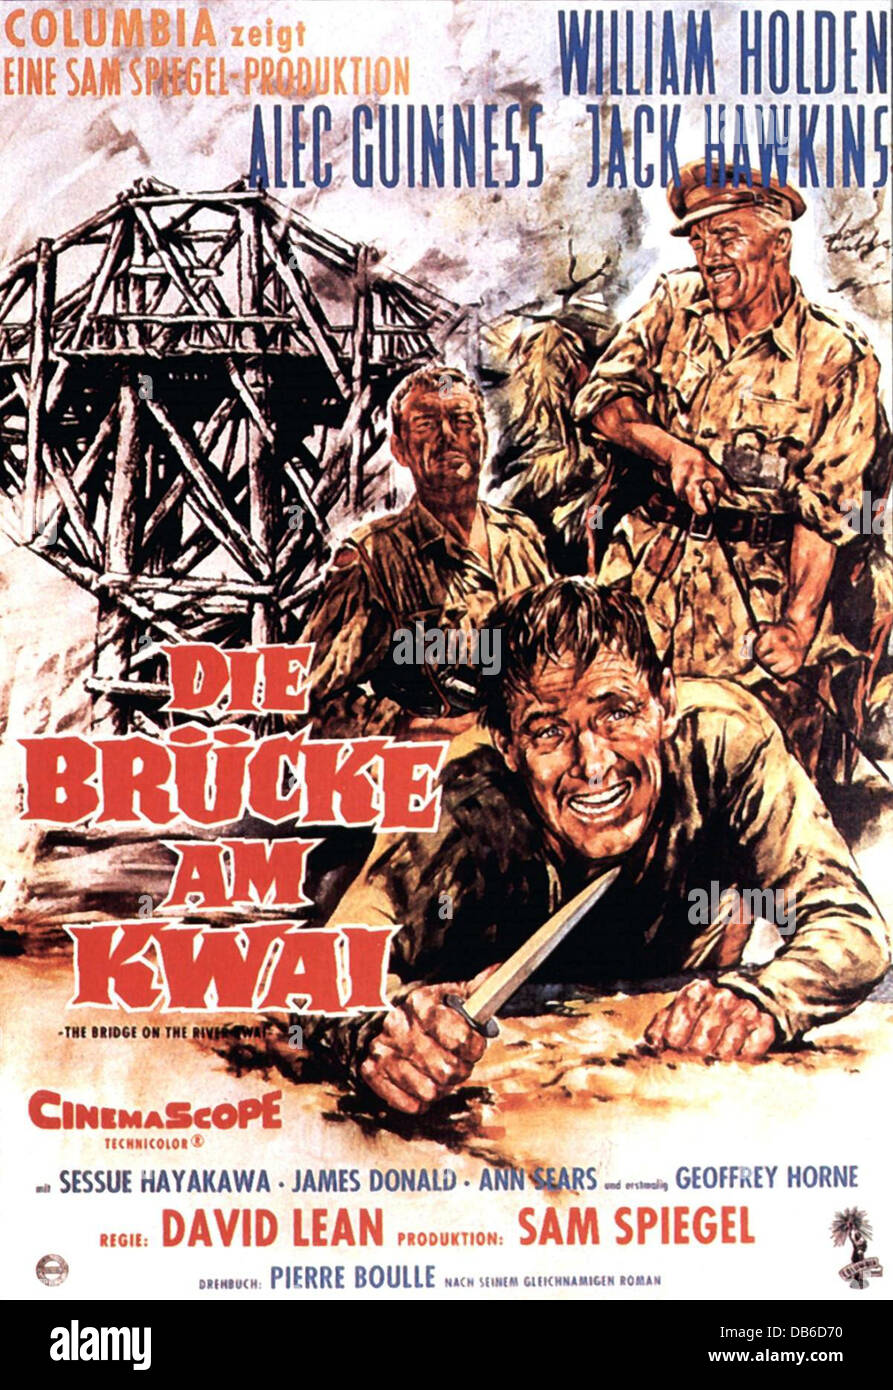 Image result for THE BRIDGE ON THE RIVER KWAI poster